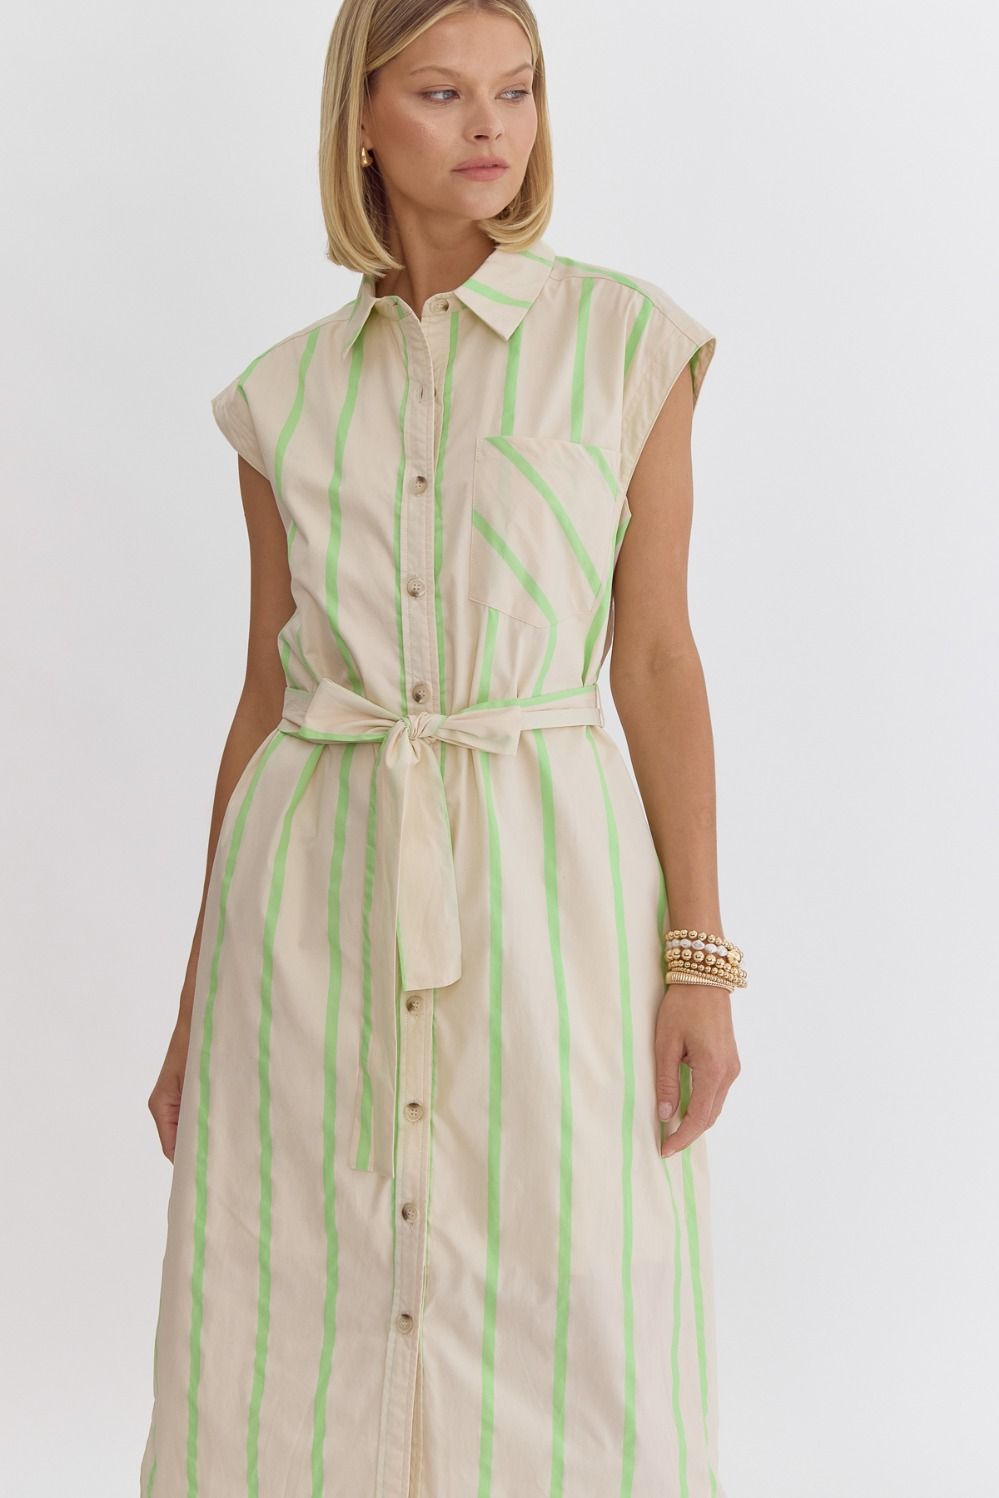 striped sleevless button up midi dress in lime-front detail